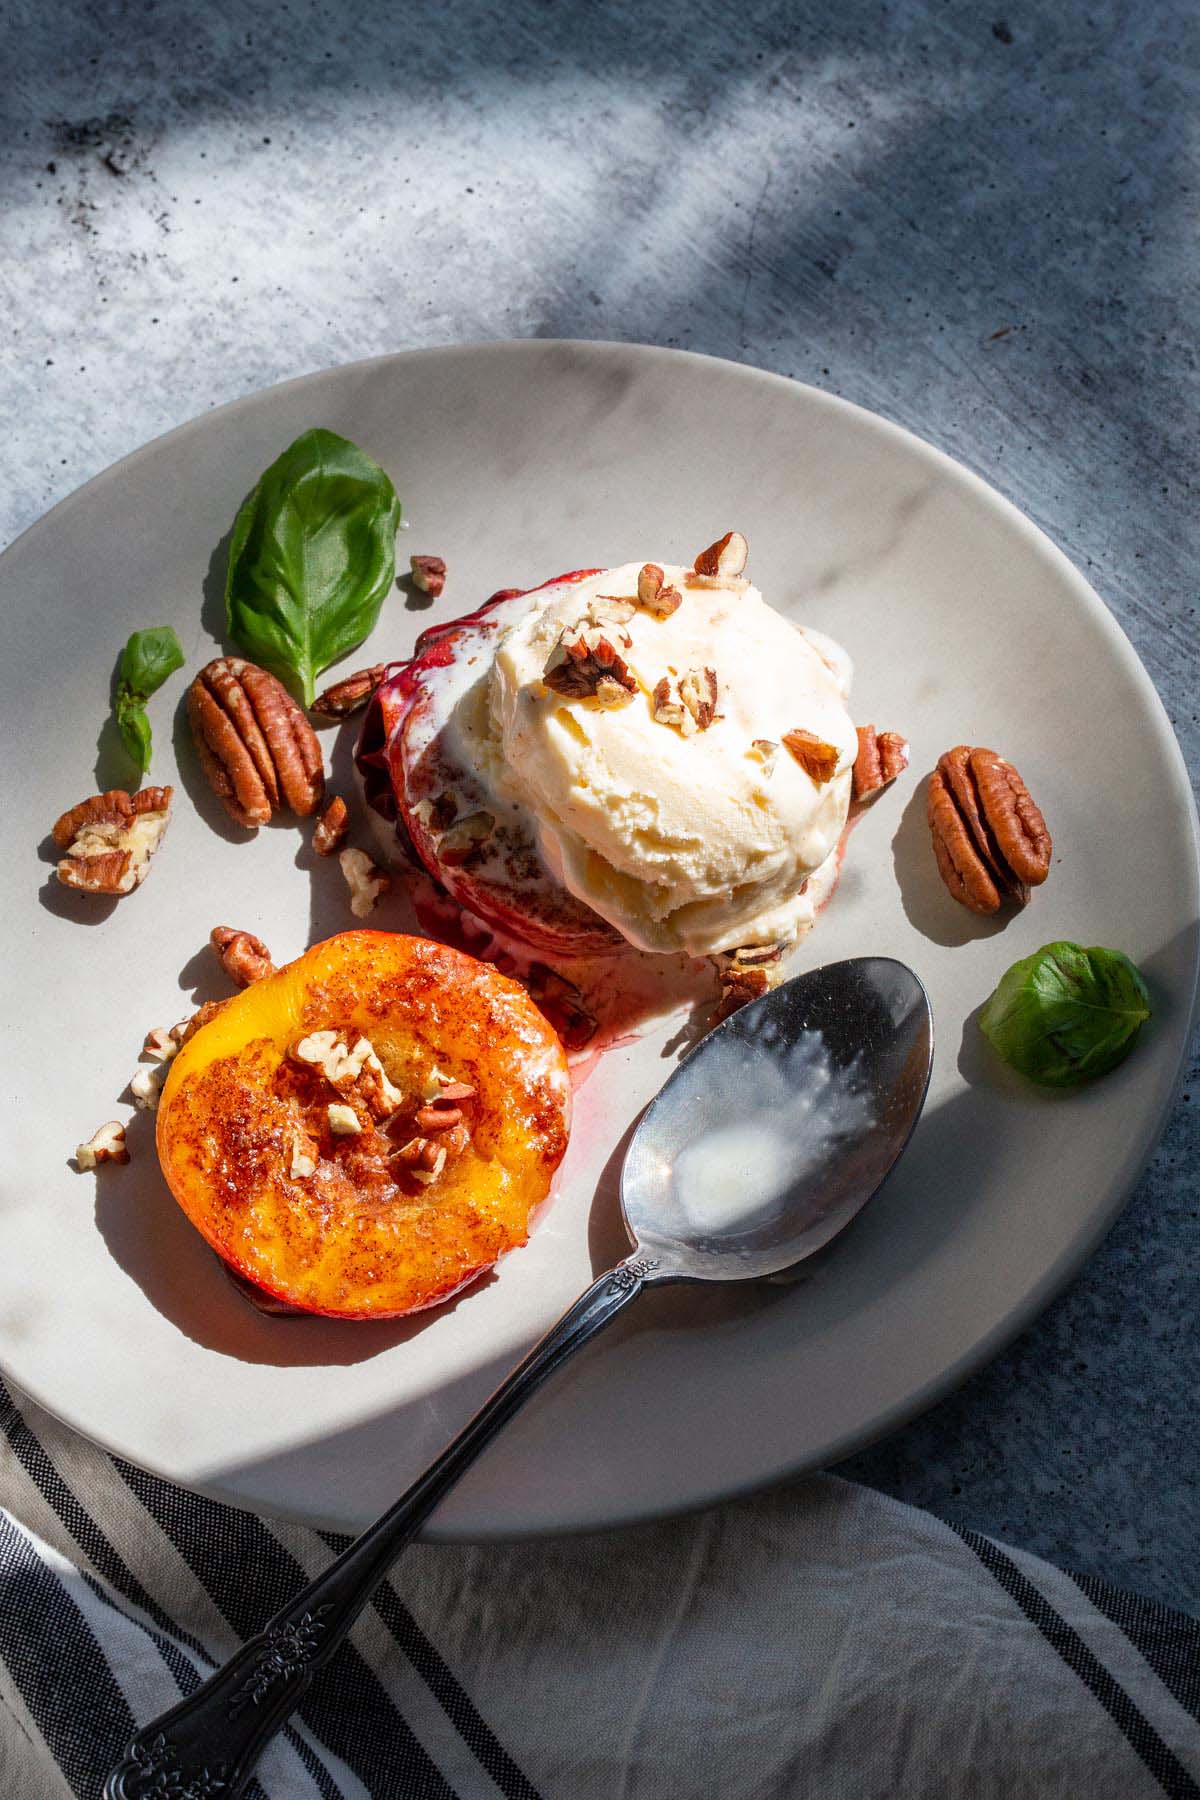 Grilled peaches topped with ice cream, pecans, and basil leaves.